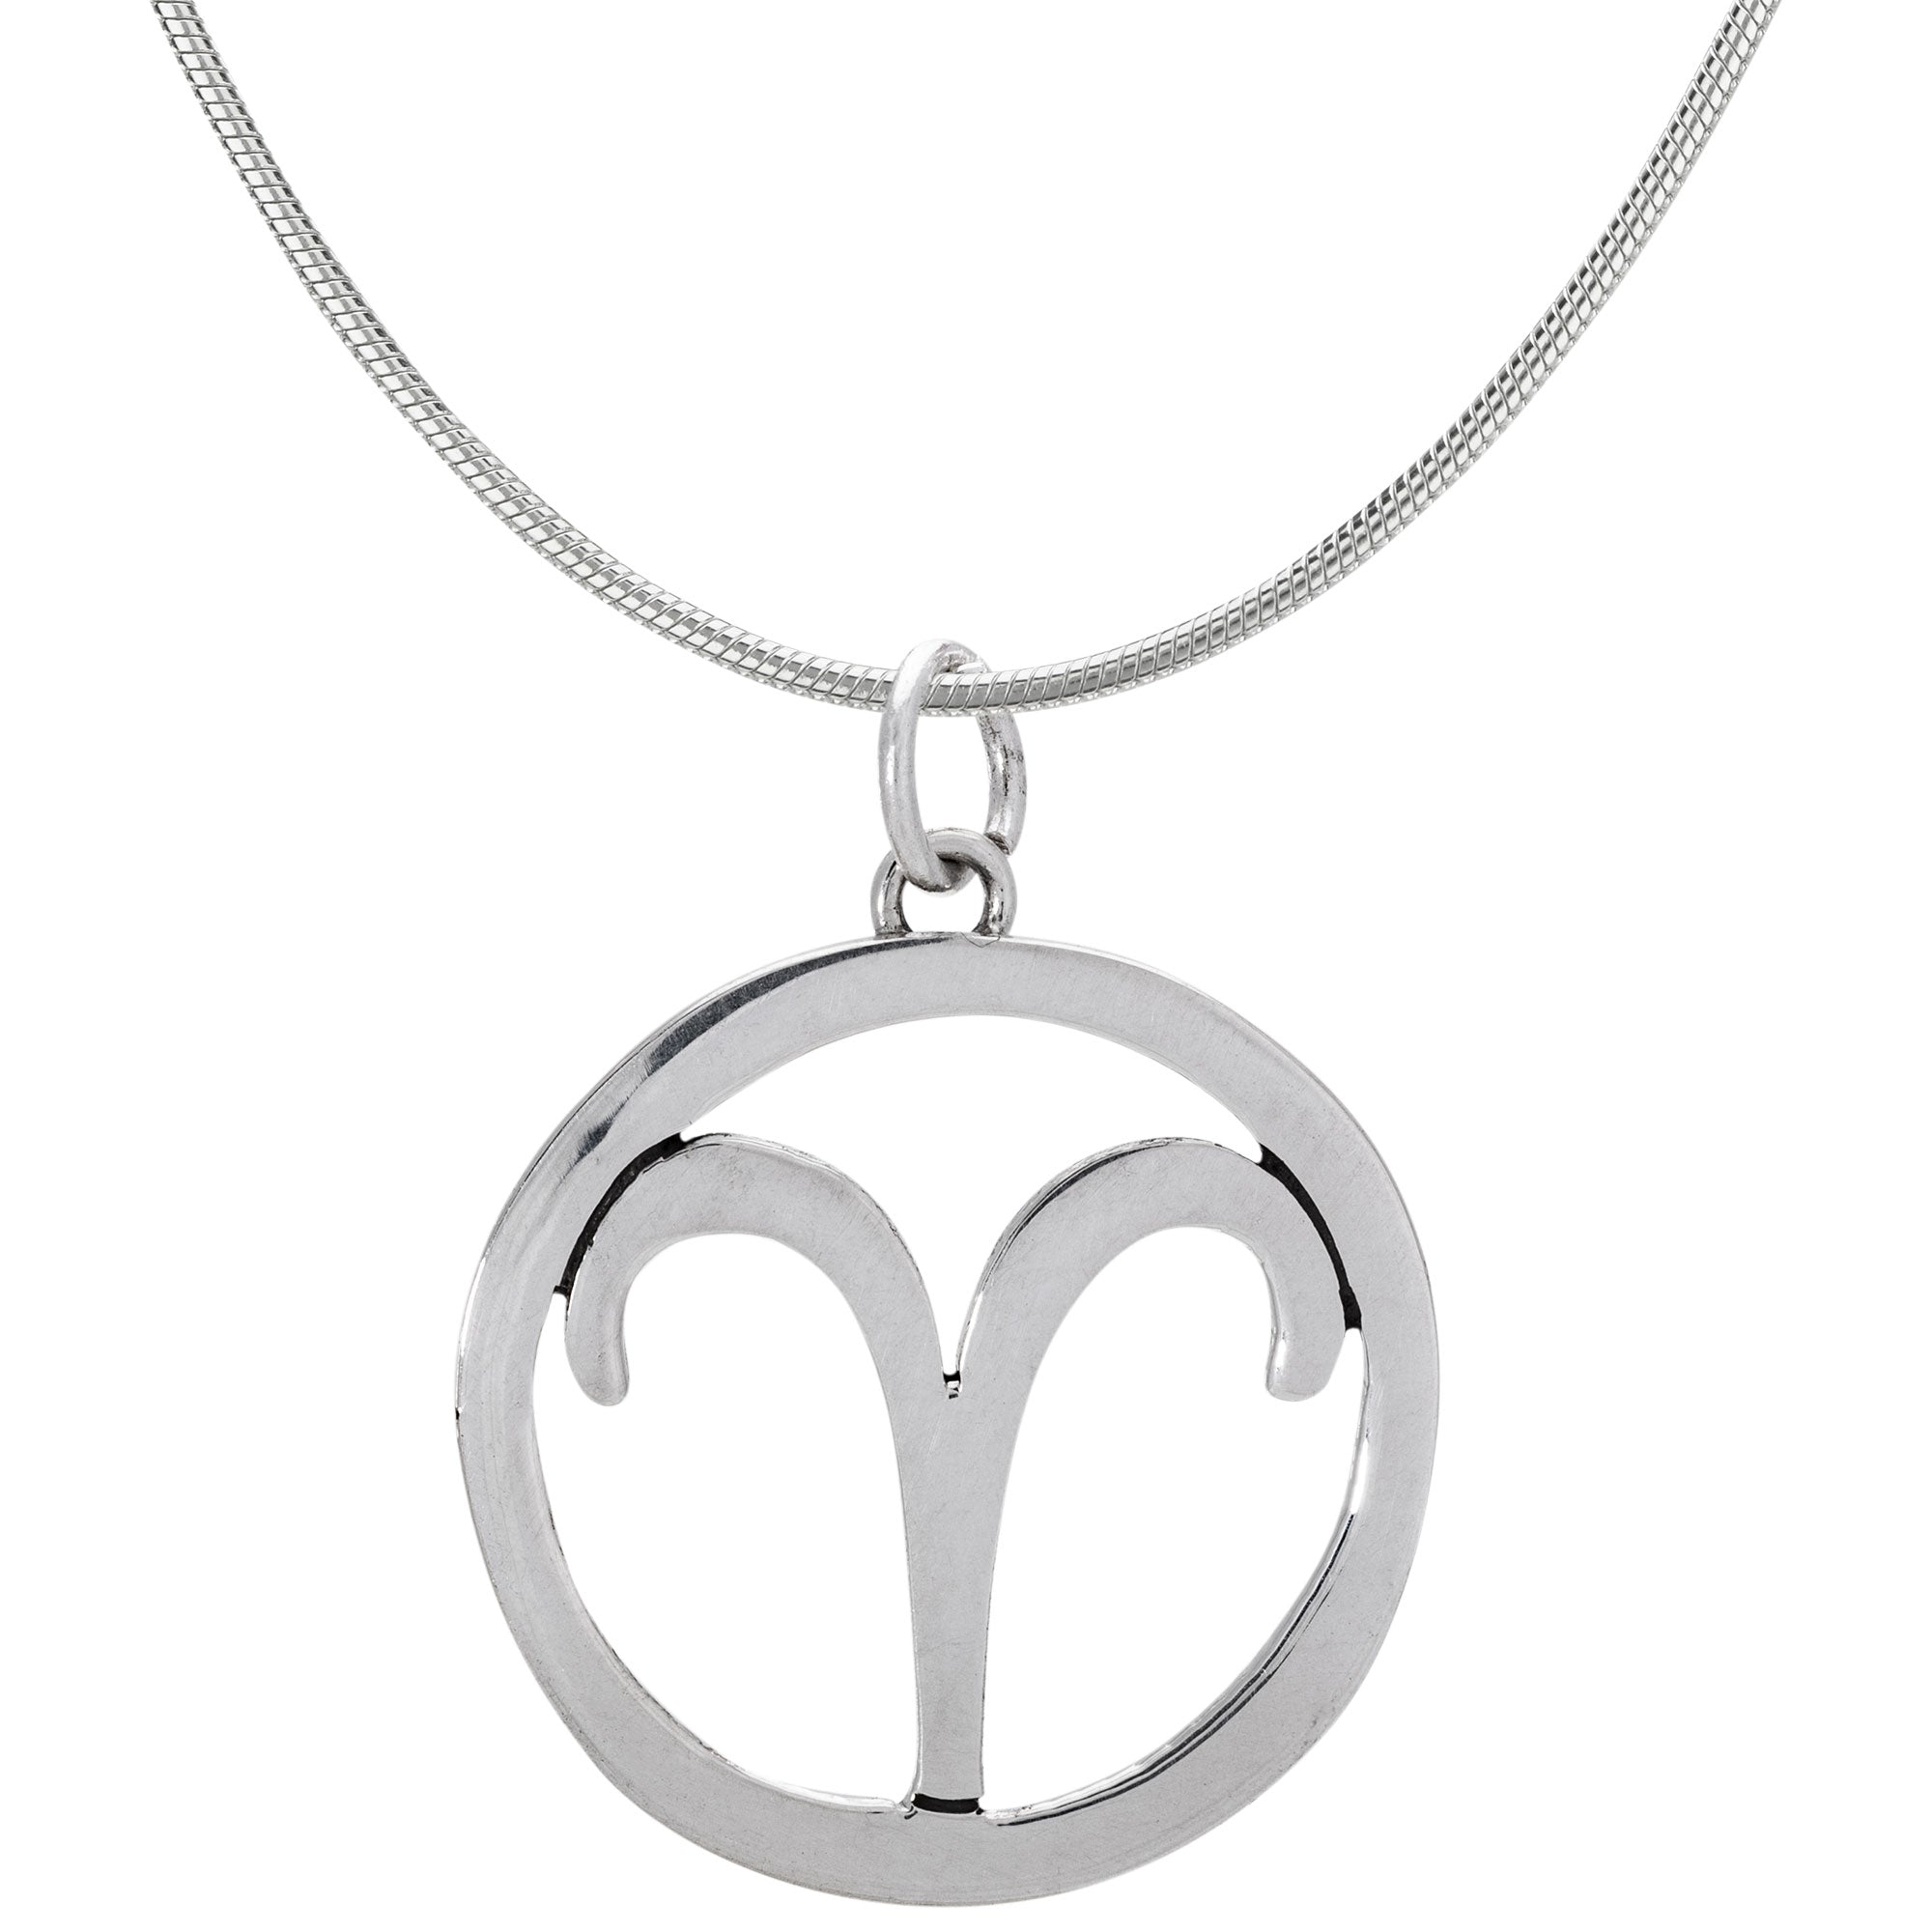 Zodiac Sign Astrology Necklace Collection - Aquarius - Pendant Only